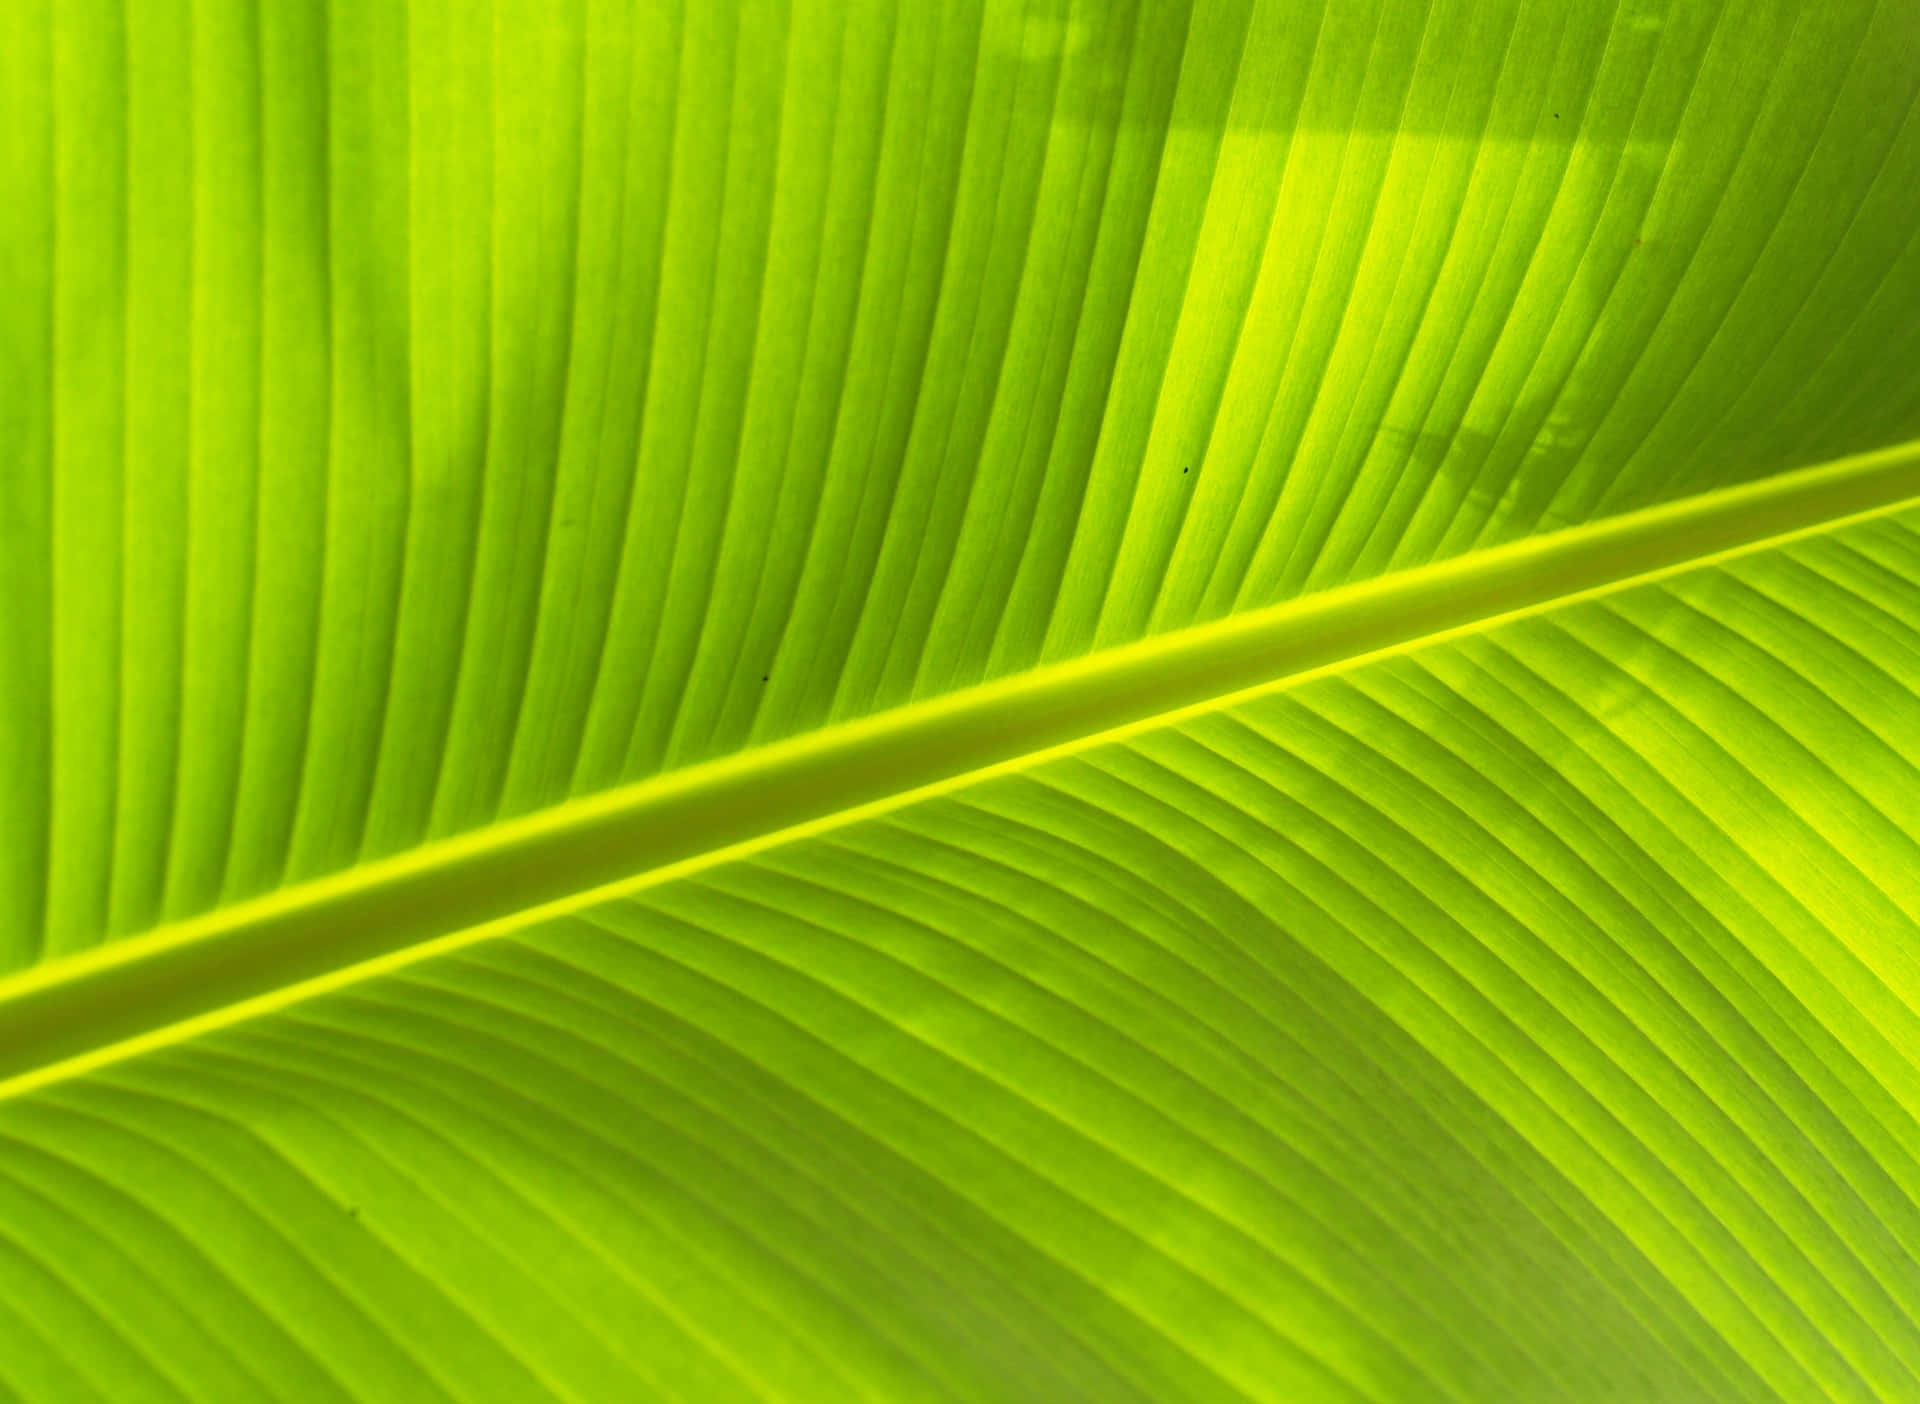 A fresh and vibrant banana leaf in its natural environment